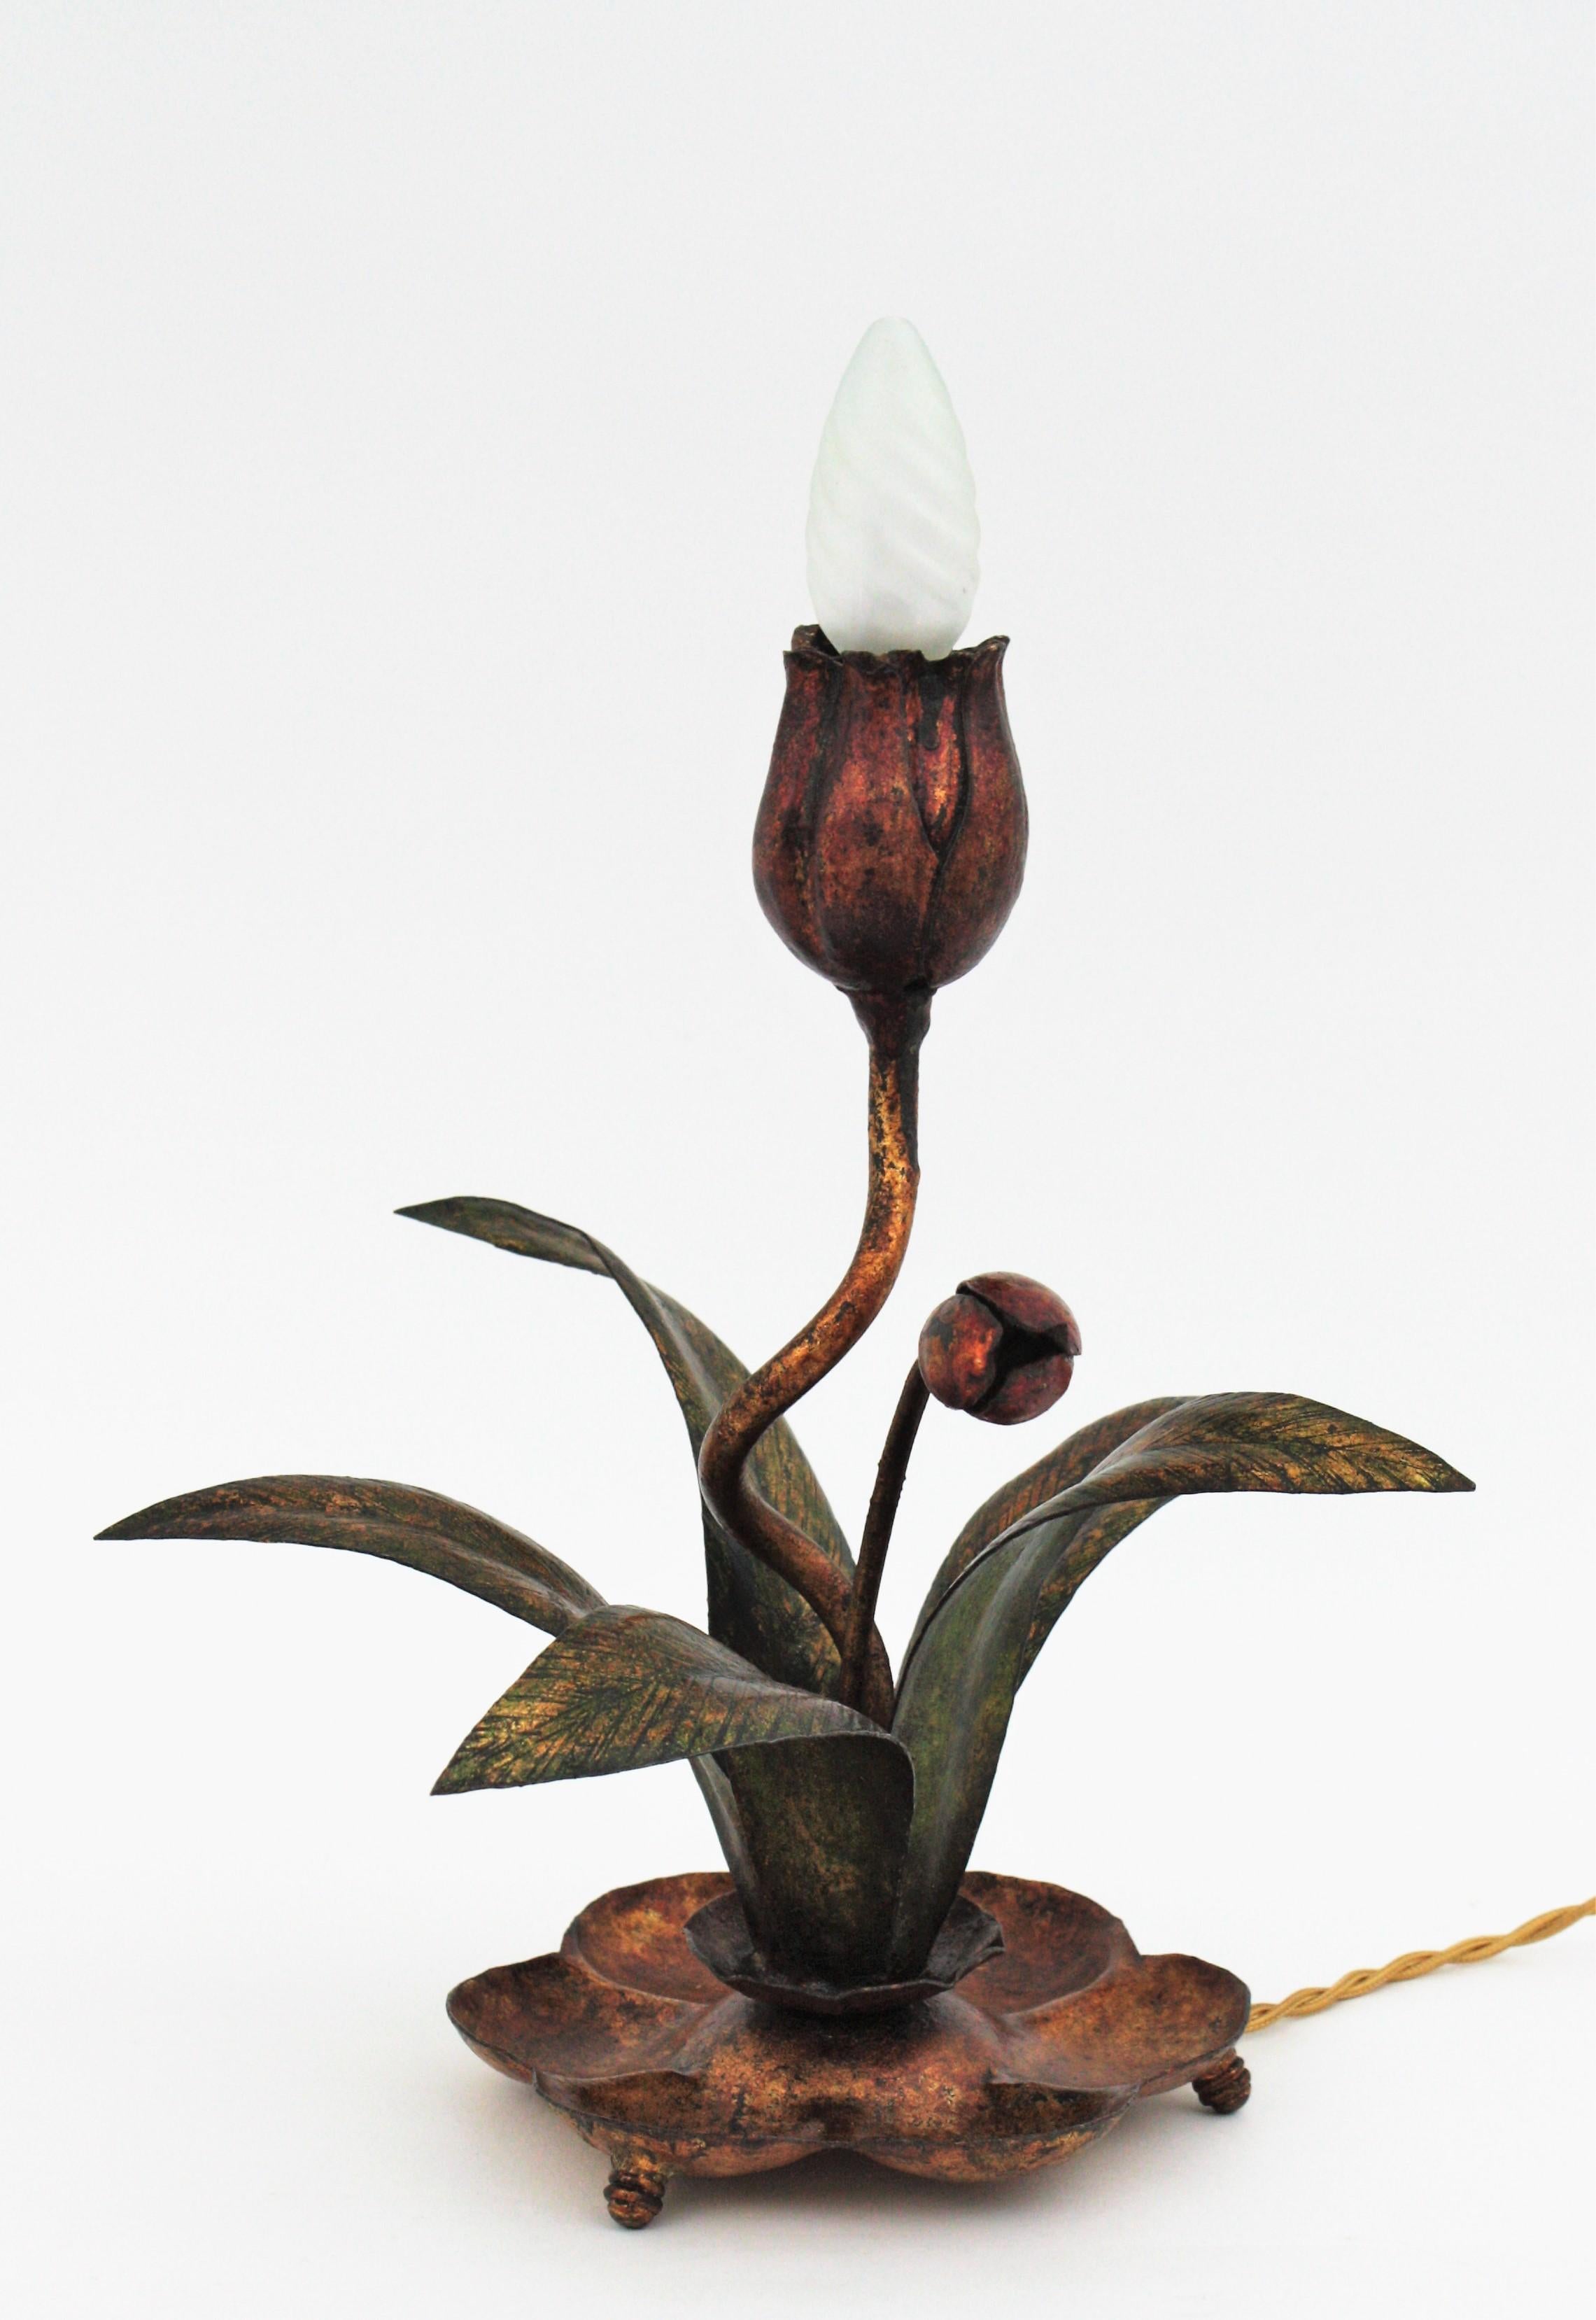 Eye-catching Polychomed gilt metal floral table lamp, Spain, 1930s.
This table lamp features a standing up red flower holding a bulb. The flower is raising up from a plant with green leaves. A small flower bud completes the lamp.
This lamp has a